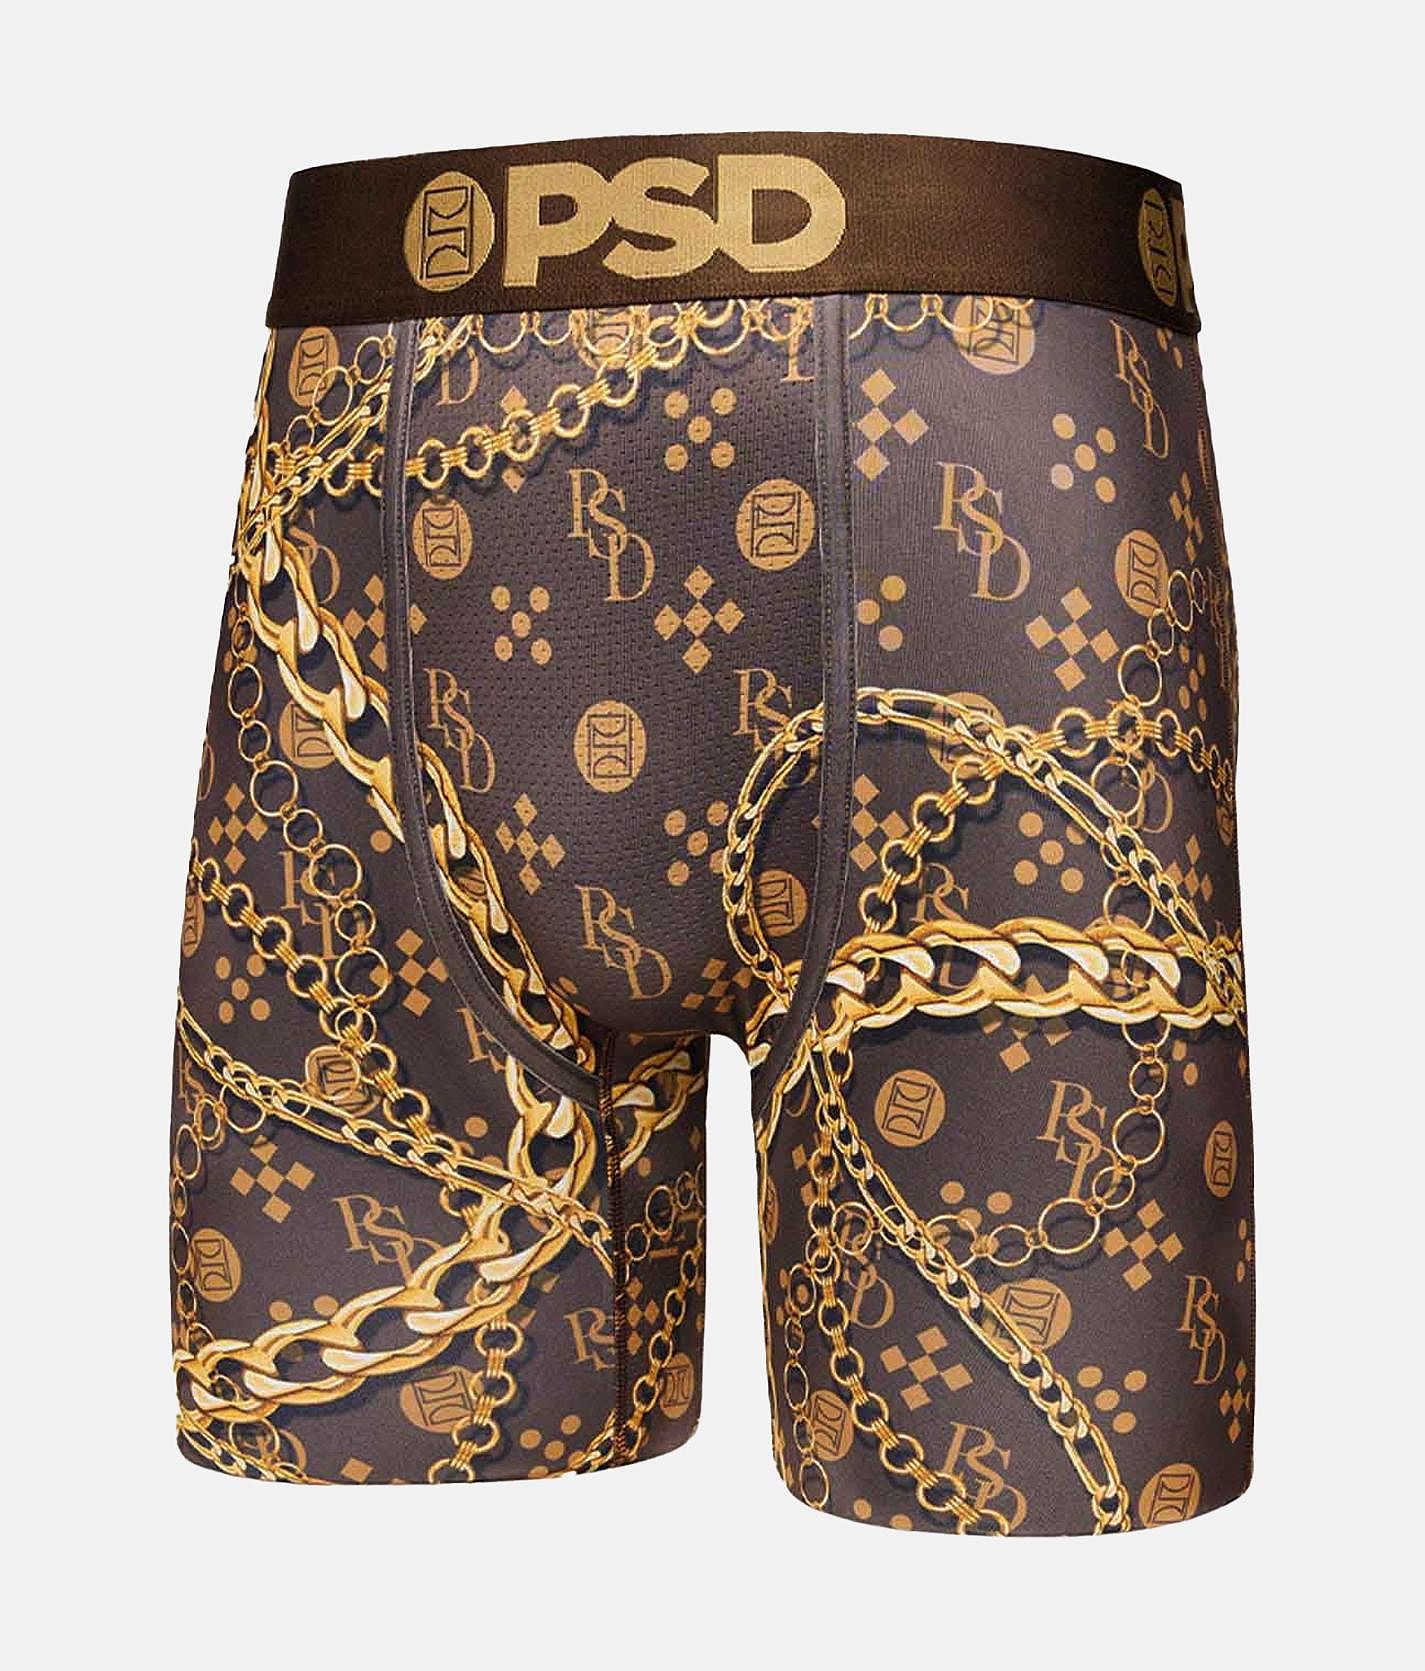 PSD Lux Chain Stretch Boxer Briefs - Men's Boxers in Gold